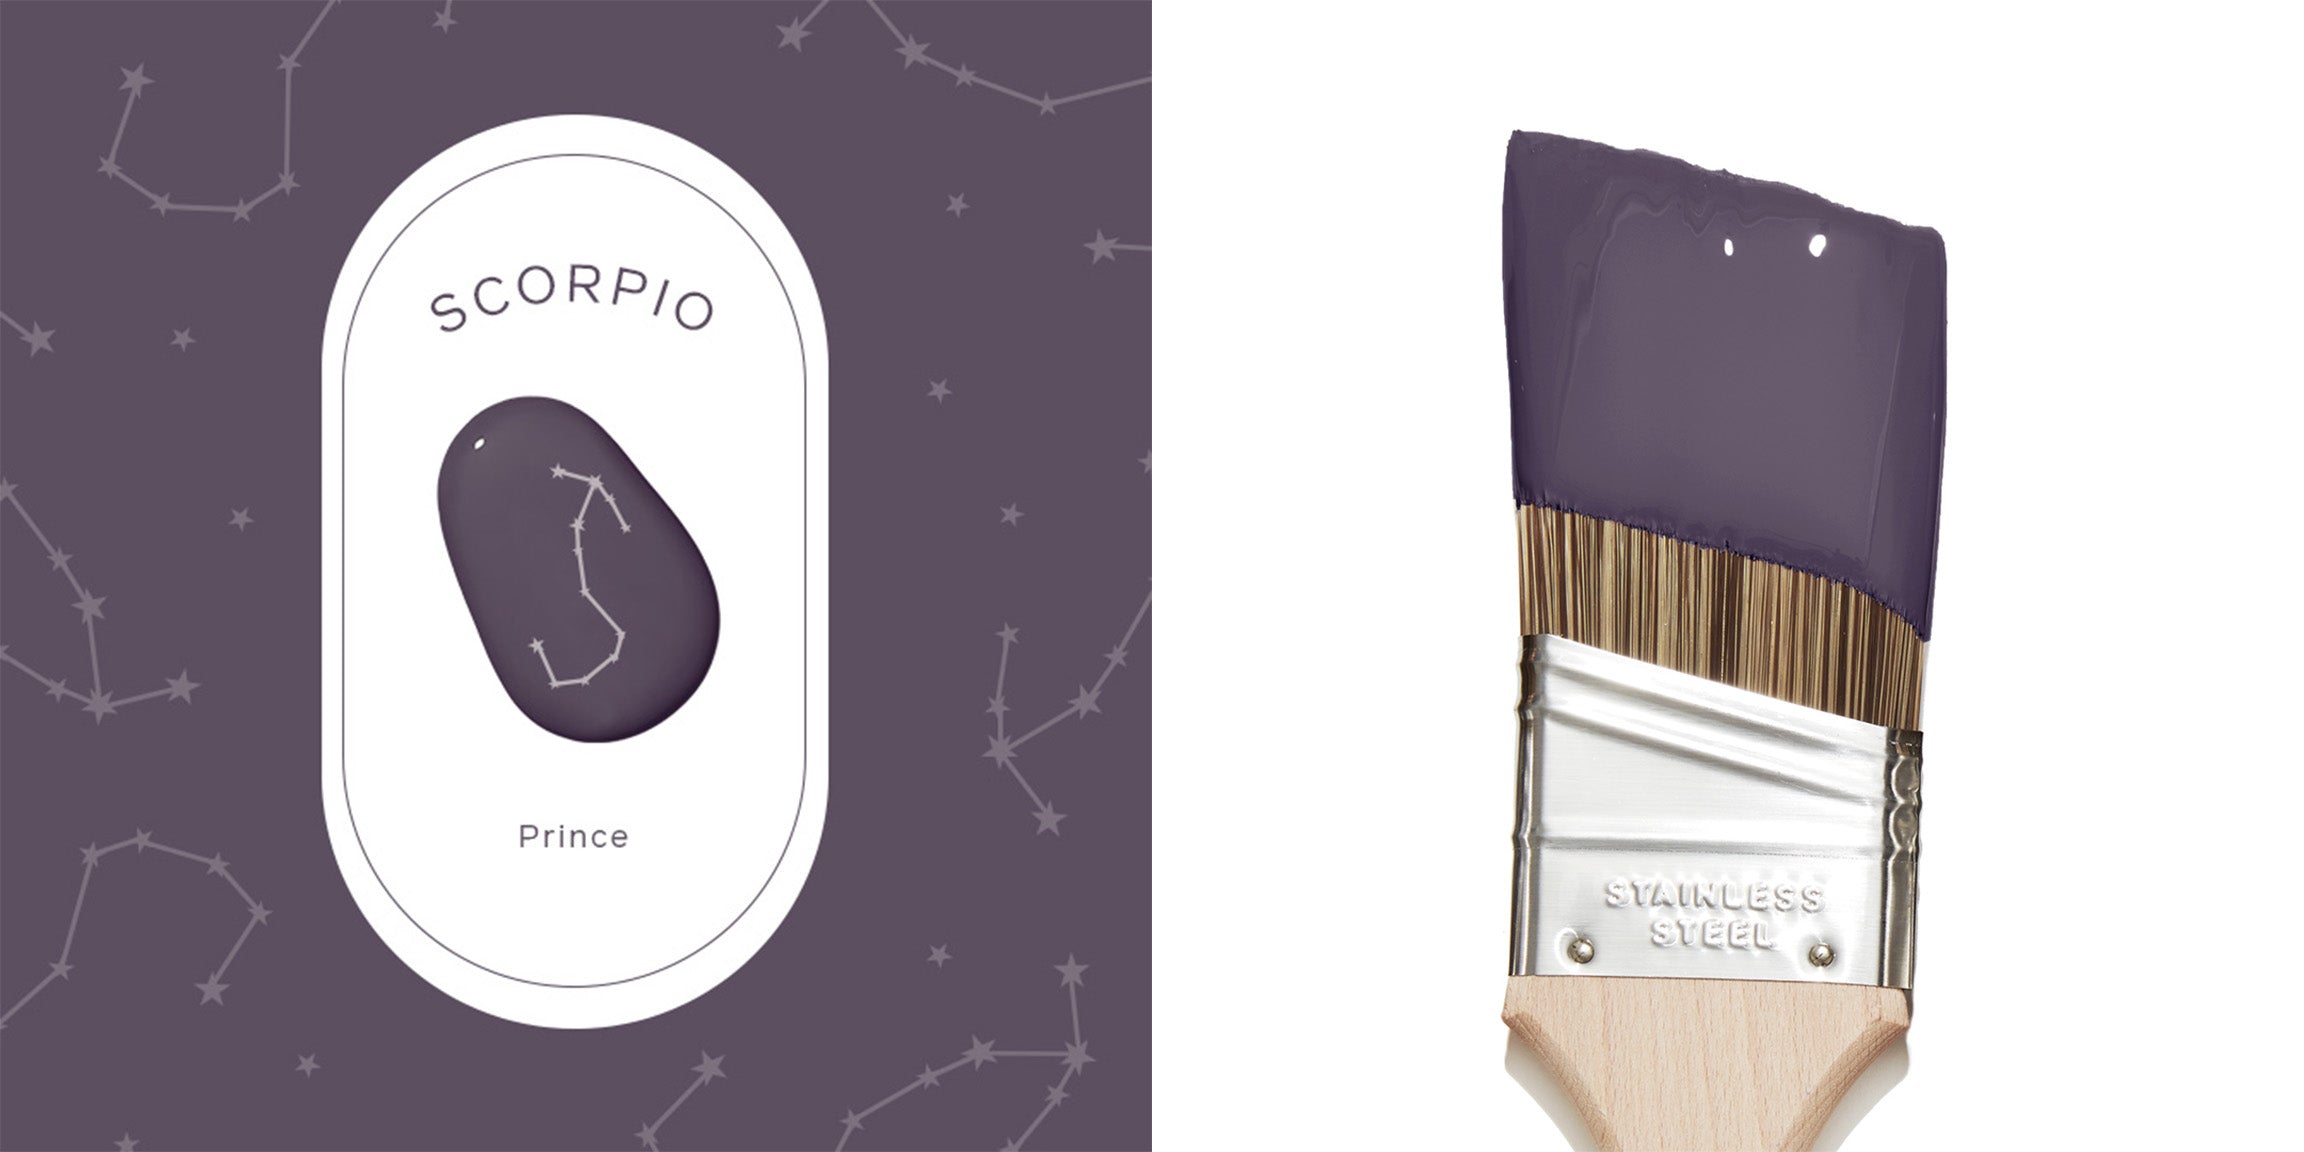 Get your 2023 horoscope and find the perfect paint colors for your zodiac. For Scorpio, it’s Prince — a rich purple paint color from Clare.